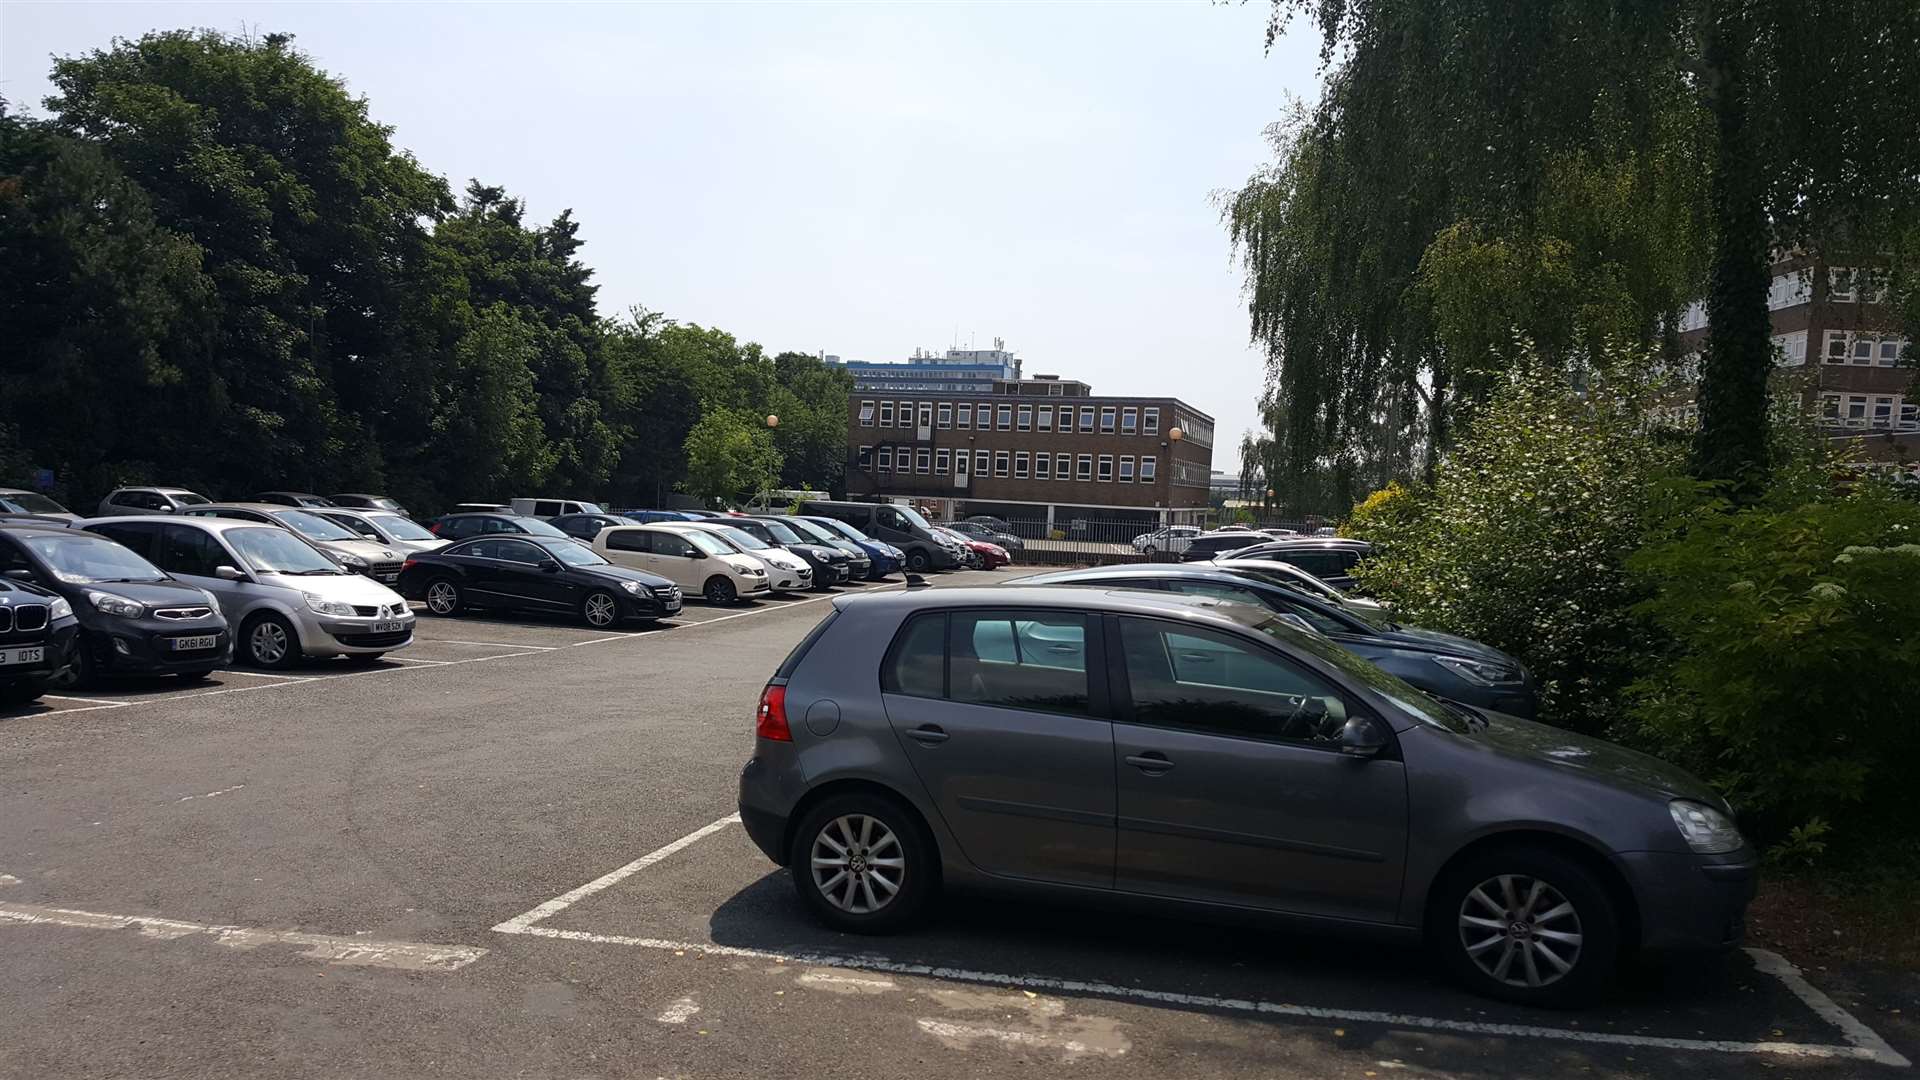 The current Station Road car park will be built on